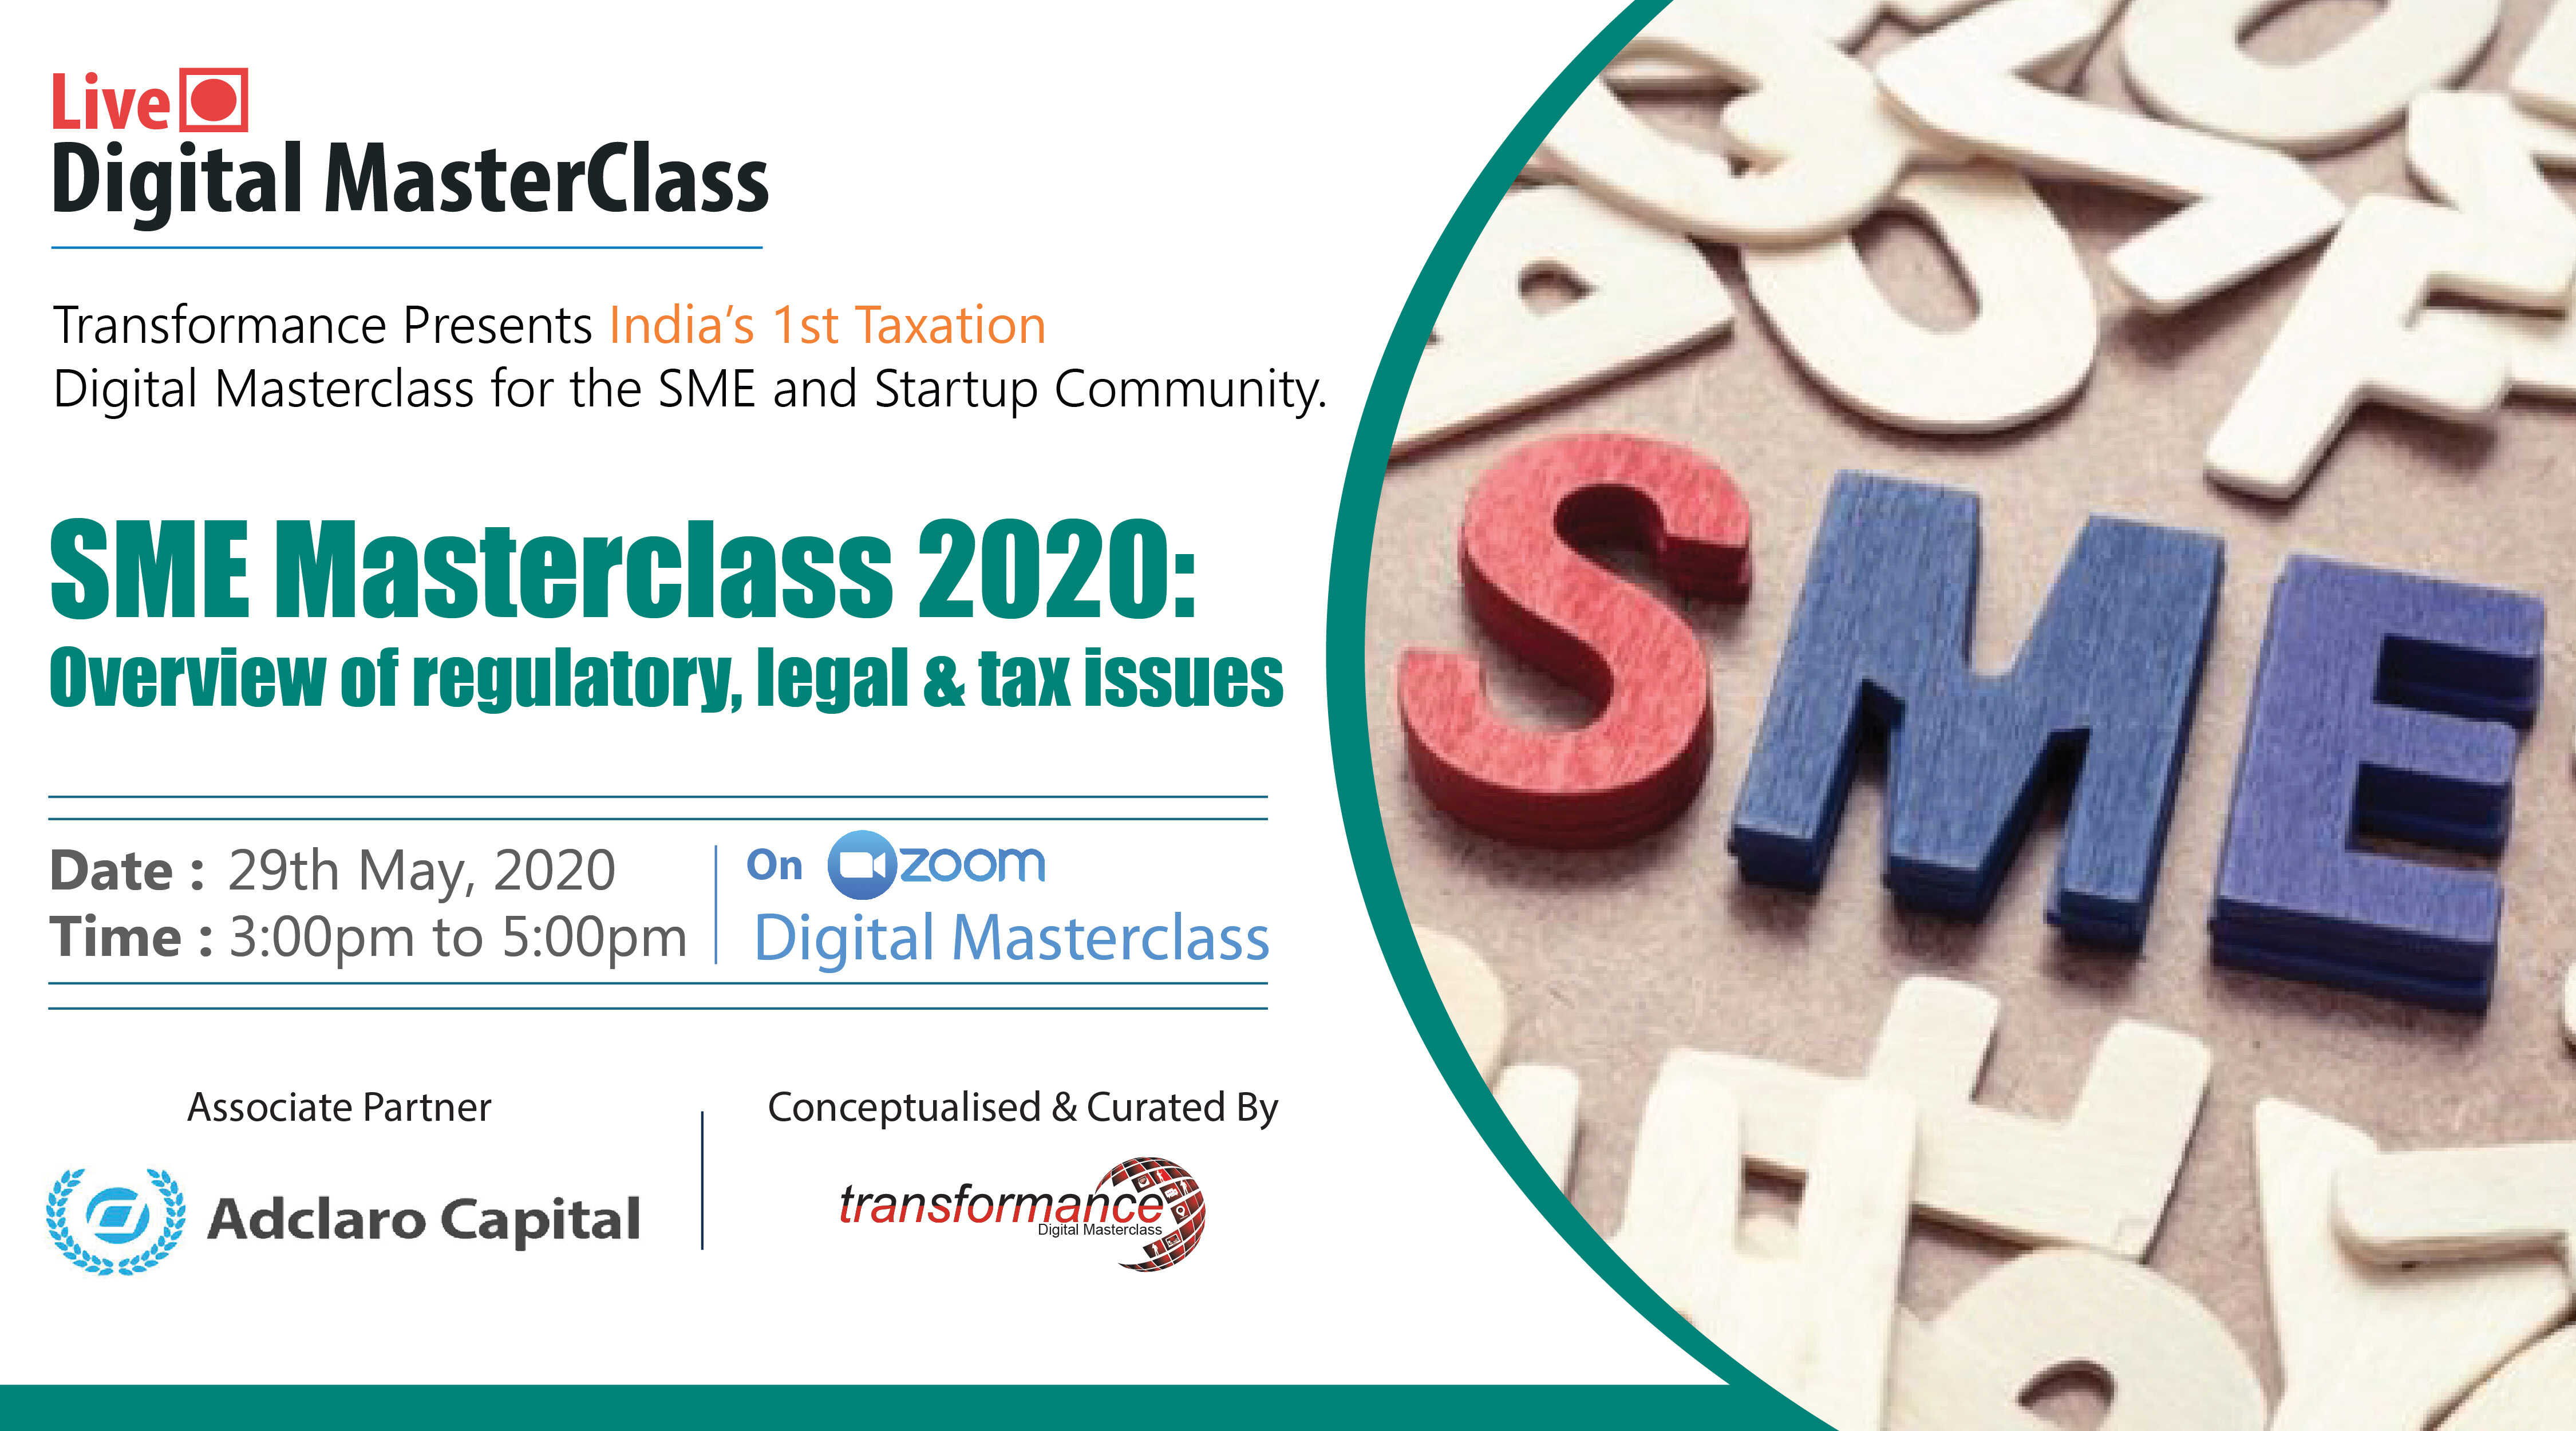 SME Masterclass 2020: Overview of regulatory, legal & tax issues 